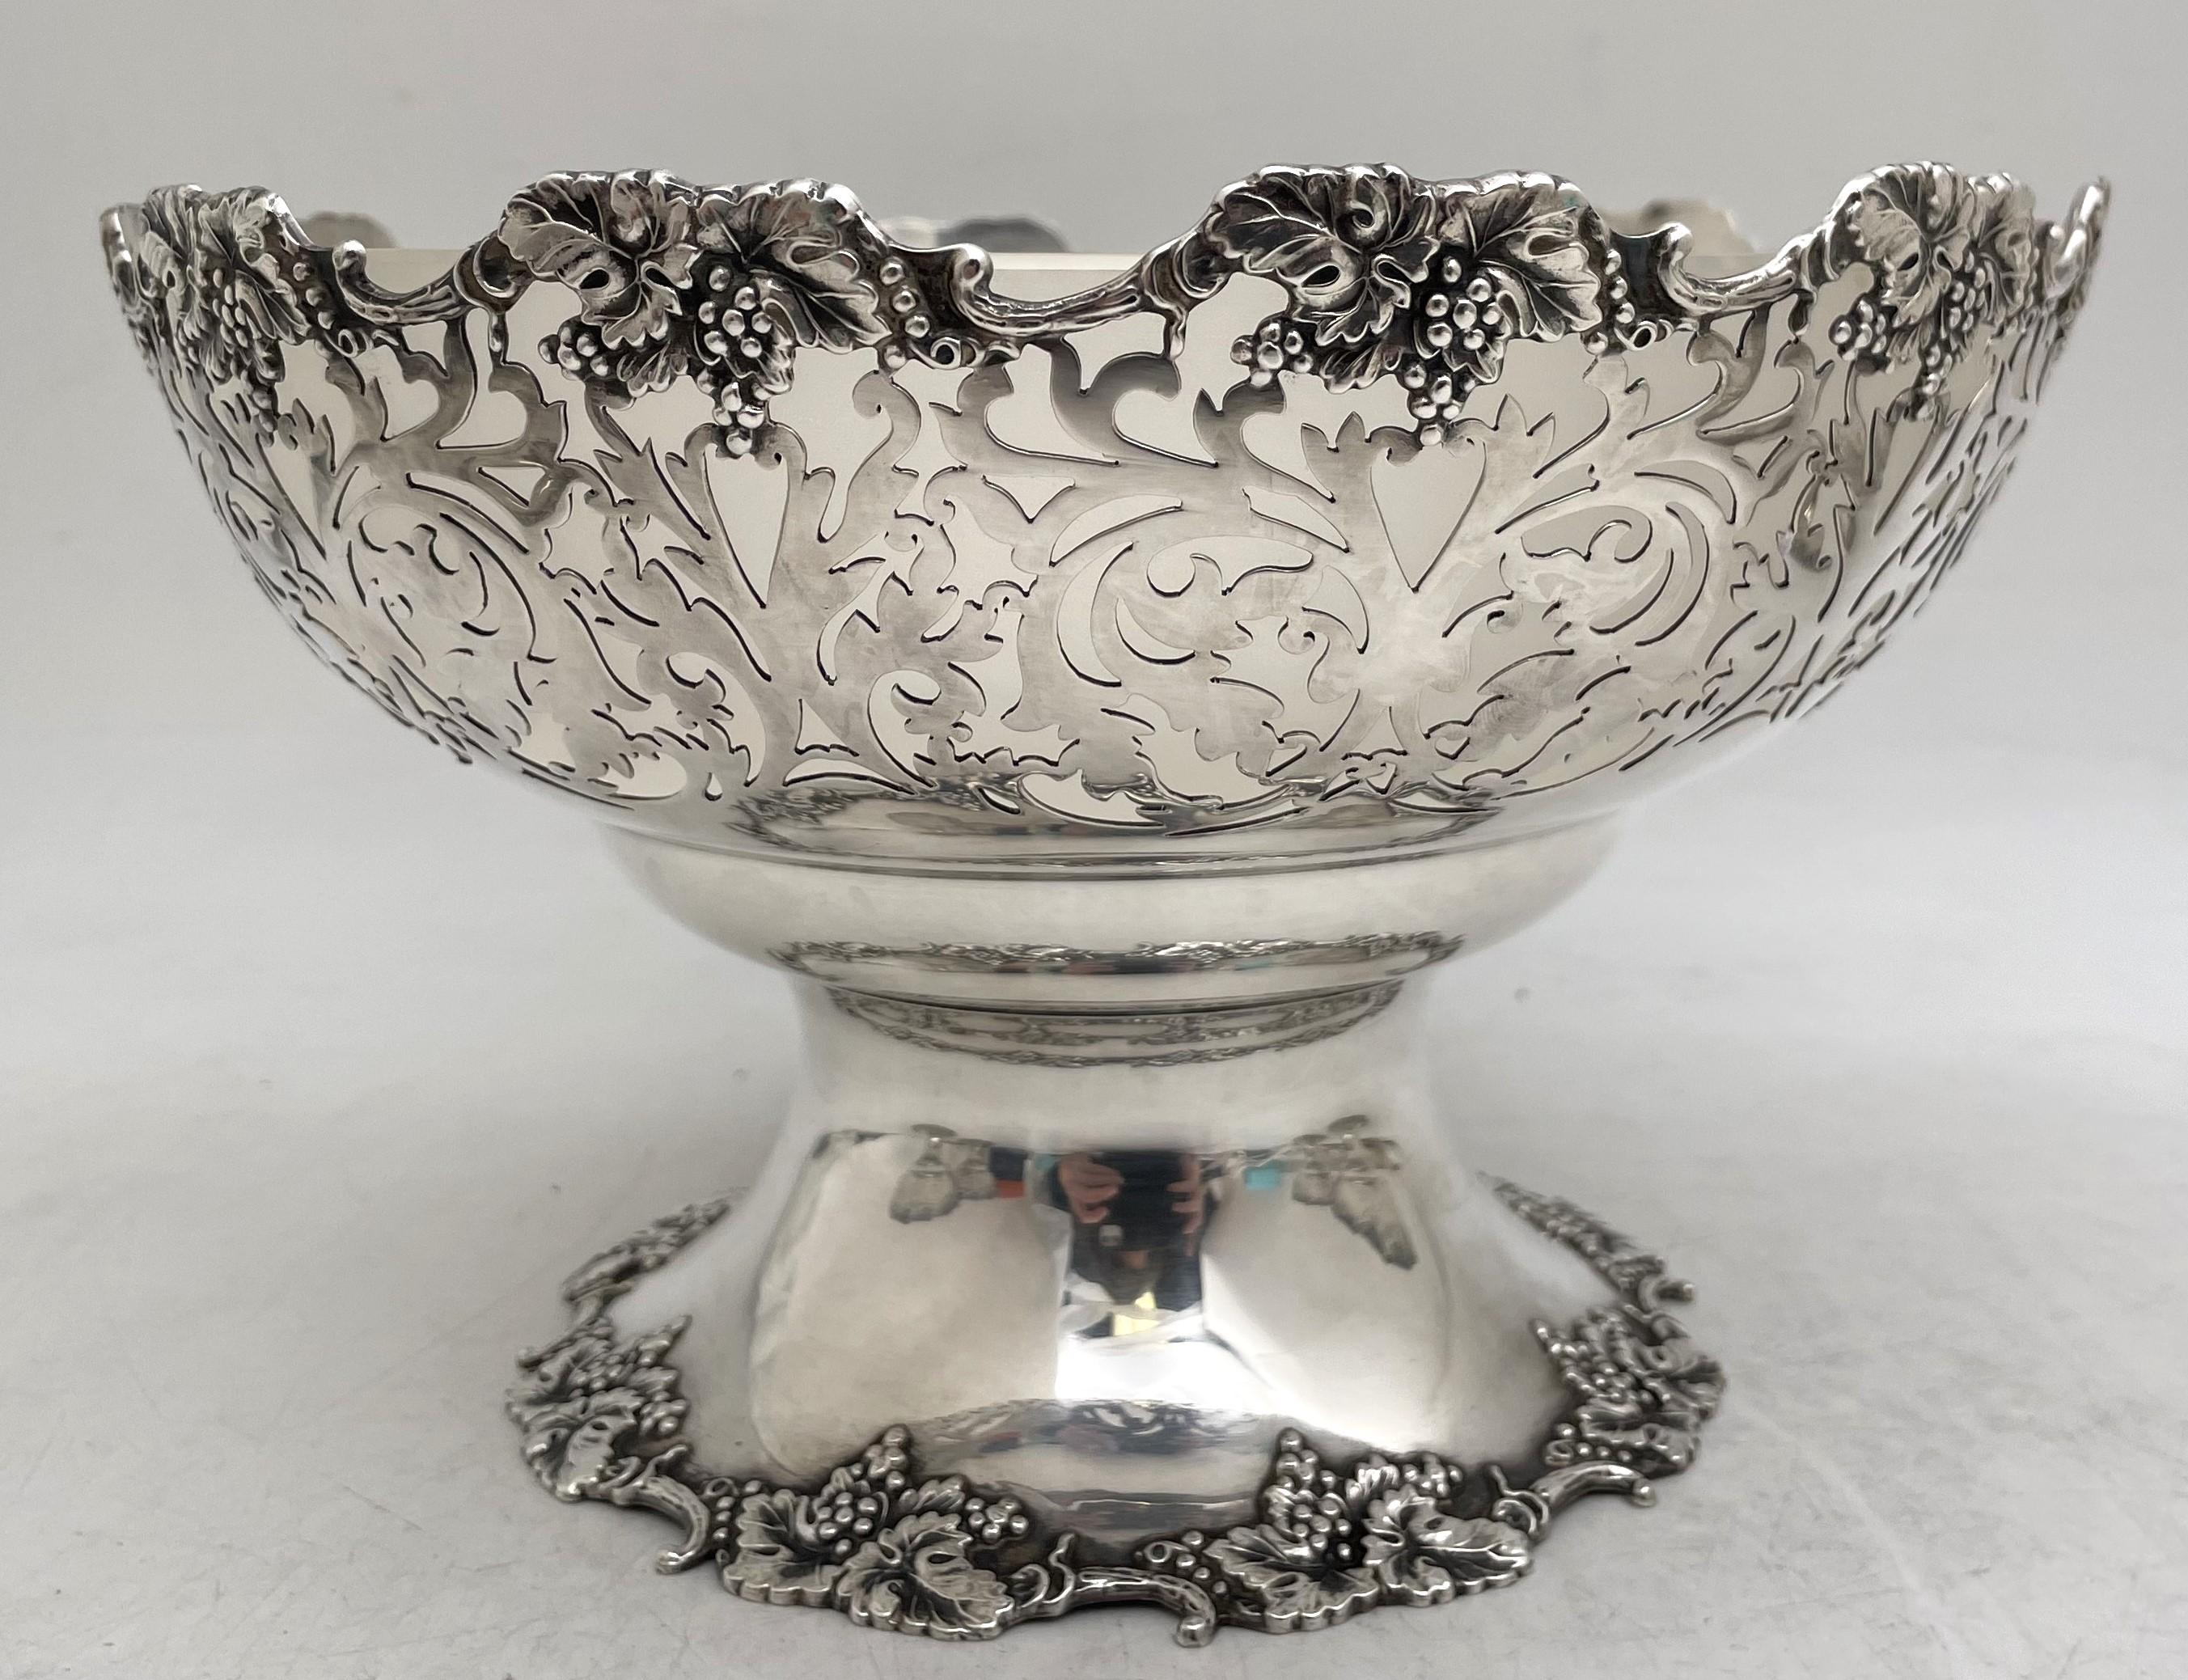 Walker & Hall, English sterling silver punch bowl set with original glass liners, made in Birmingham in 1930, with beautiful curvilinear pierced motifs and adorned with vine motifs on the rims, consisting of a punch bowl measuring 8 1/4'' in